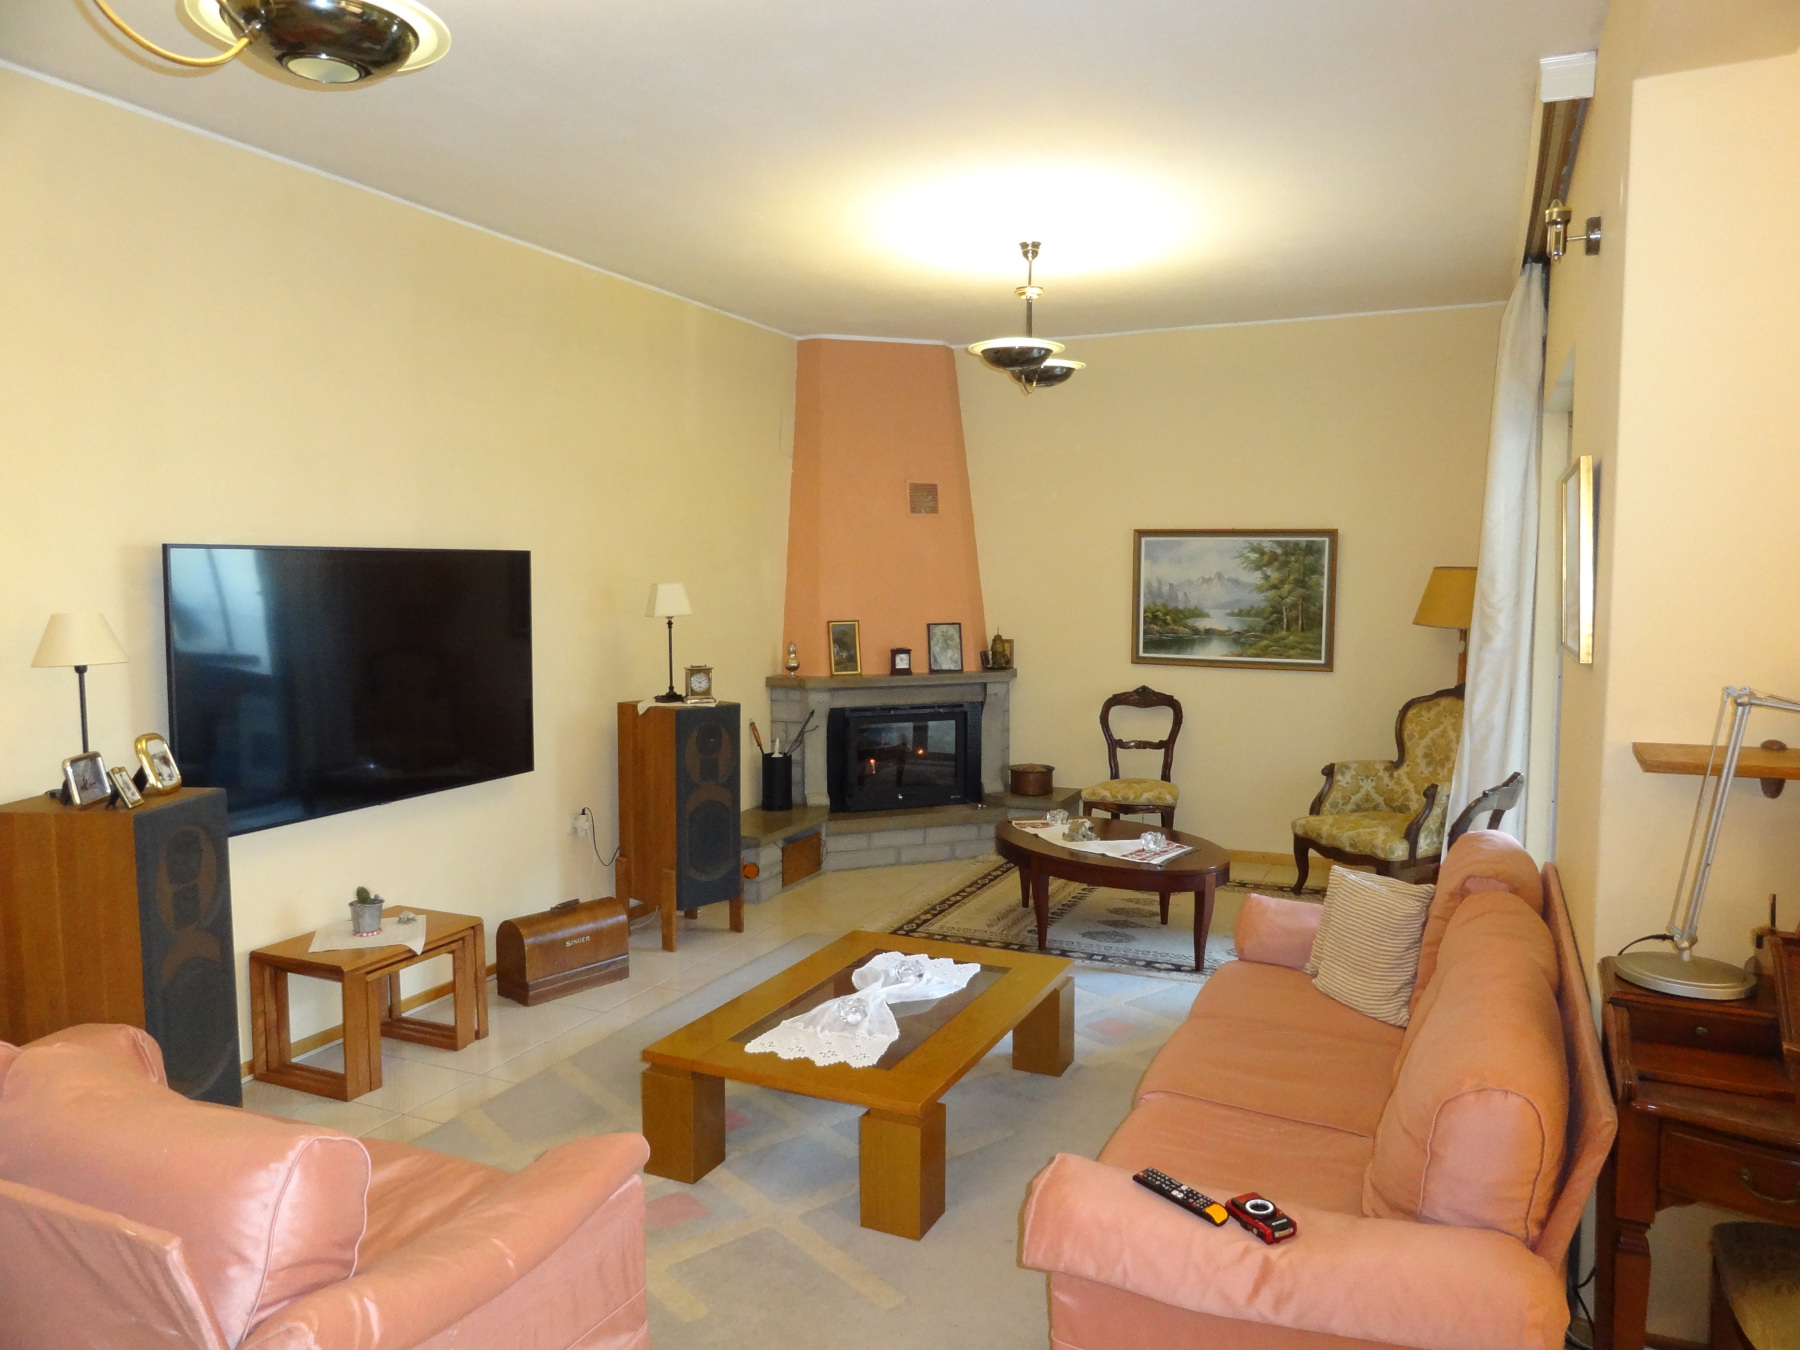 For sale 3 bedrooms apartment of 105 sq.m. 2nd floor in the center of Ioannina near Dodoni Avenue